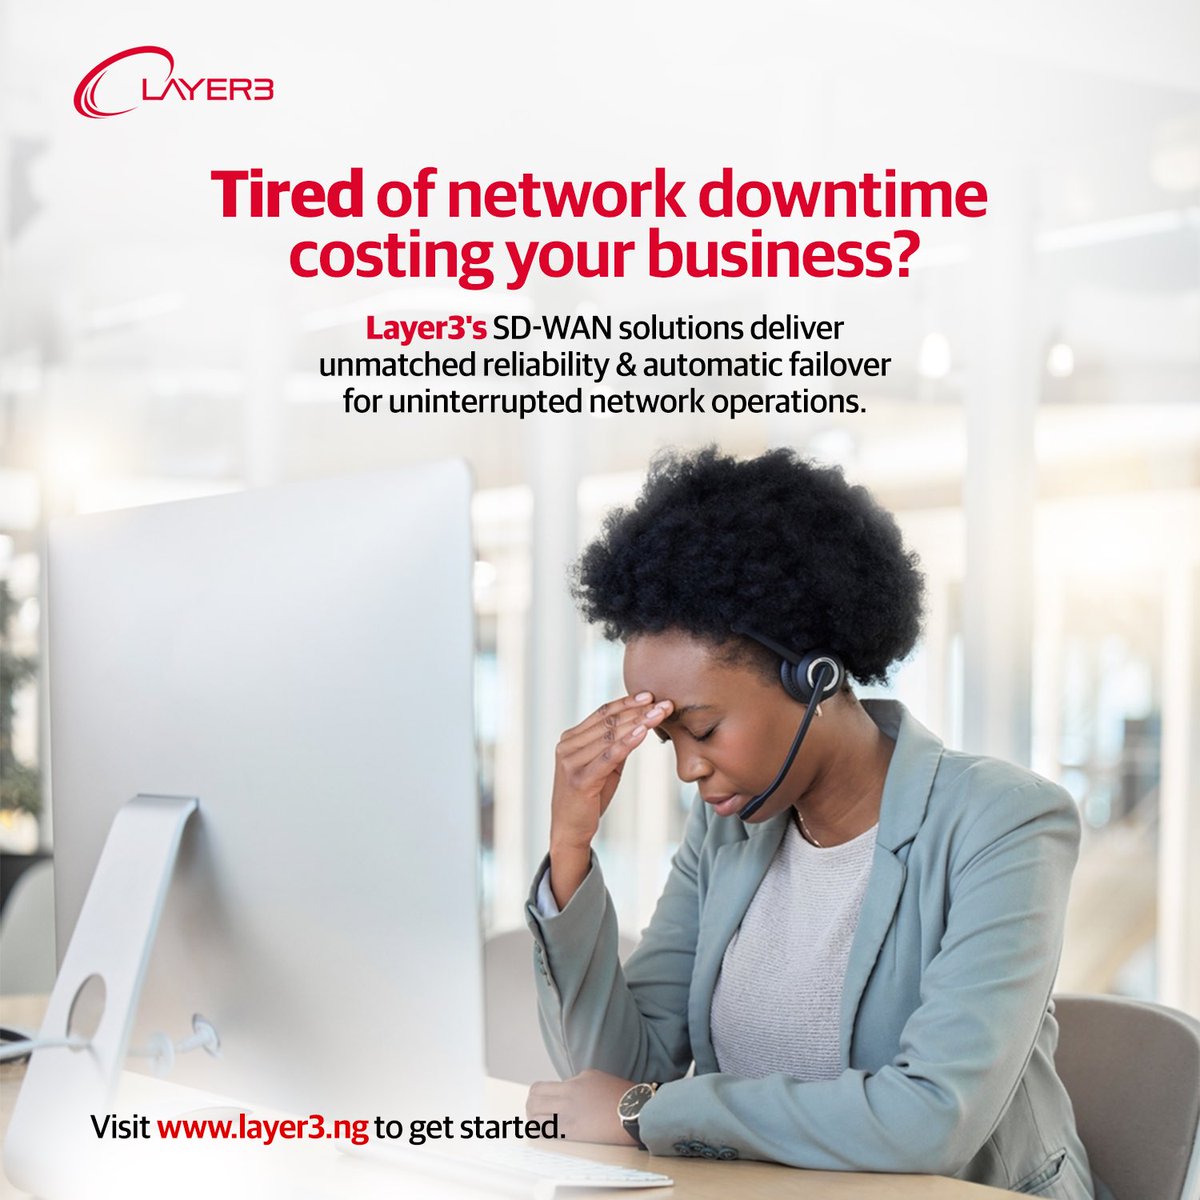 Say goodbye to network headaches!  Layer3's cutting-edge SD-WAN solutions offer unmatched reliability and automatic failover, keeping your business operations running smoothly 24/7. 

#Layer3 #SDWAN #NetworkSolutions